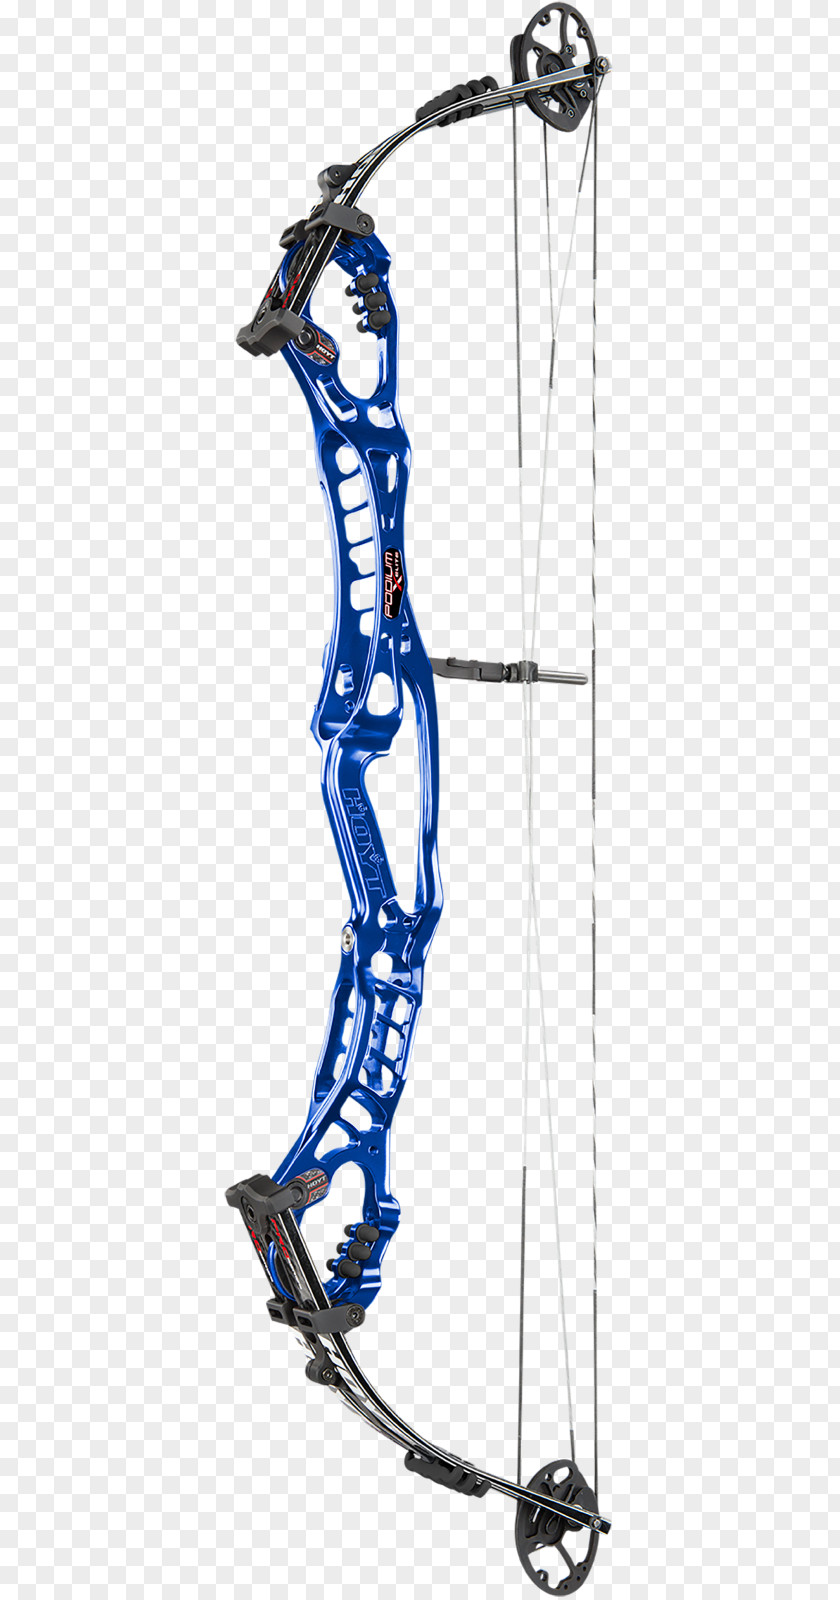 Archery Compound Bows Bow And Arrow Recurve Bowhunting PNG